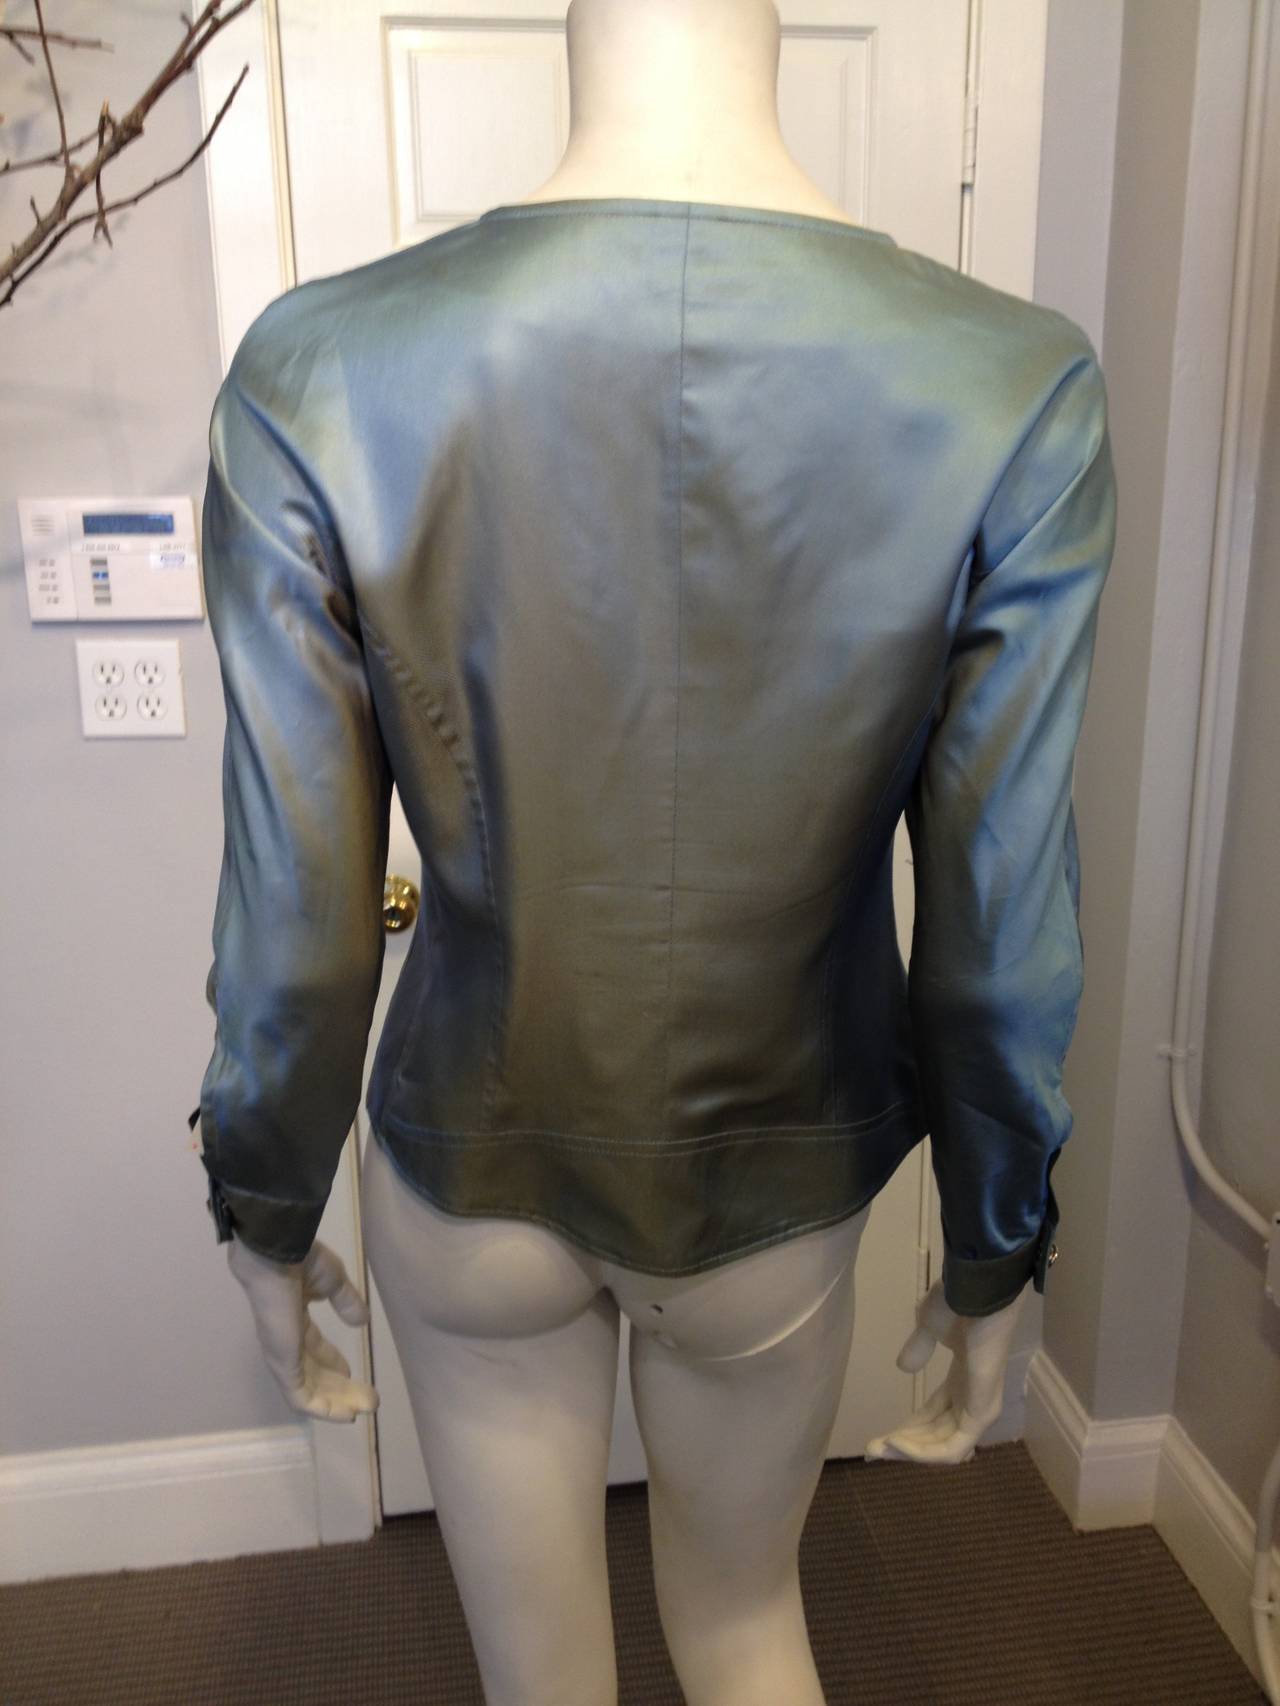 The perfect spring jacket! The fabric is a gorgeous iridescent that shifts from a soft ocean blue to warm yellowy gold when seen from different angles. The front is ruched for a flattering slim fit, with adjustable elastic cords letting you tailor